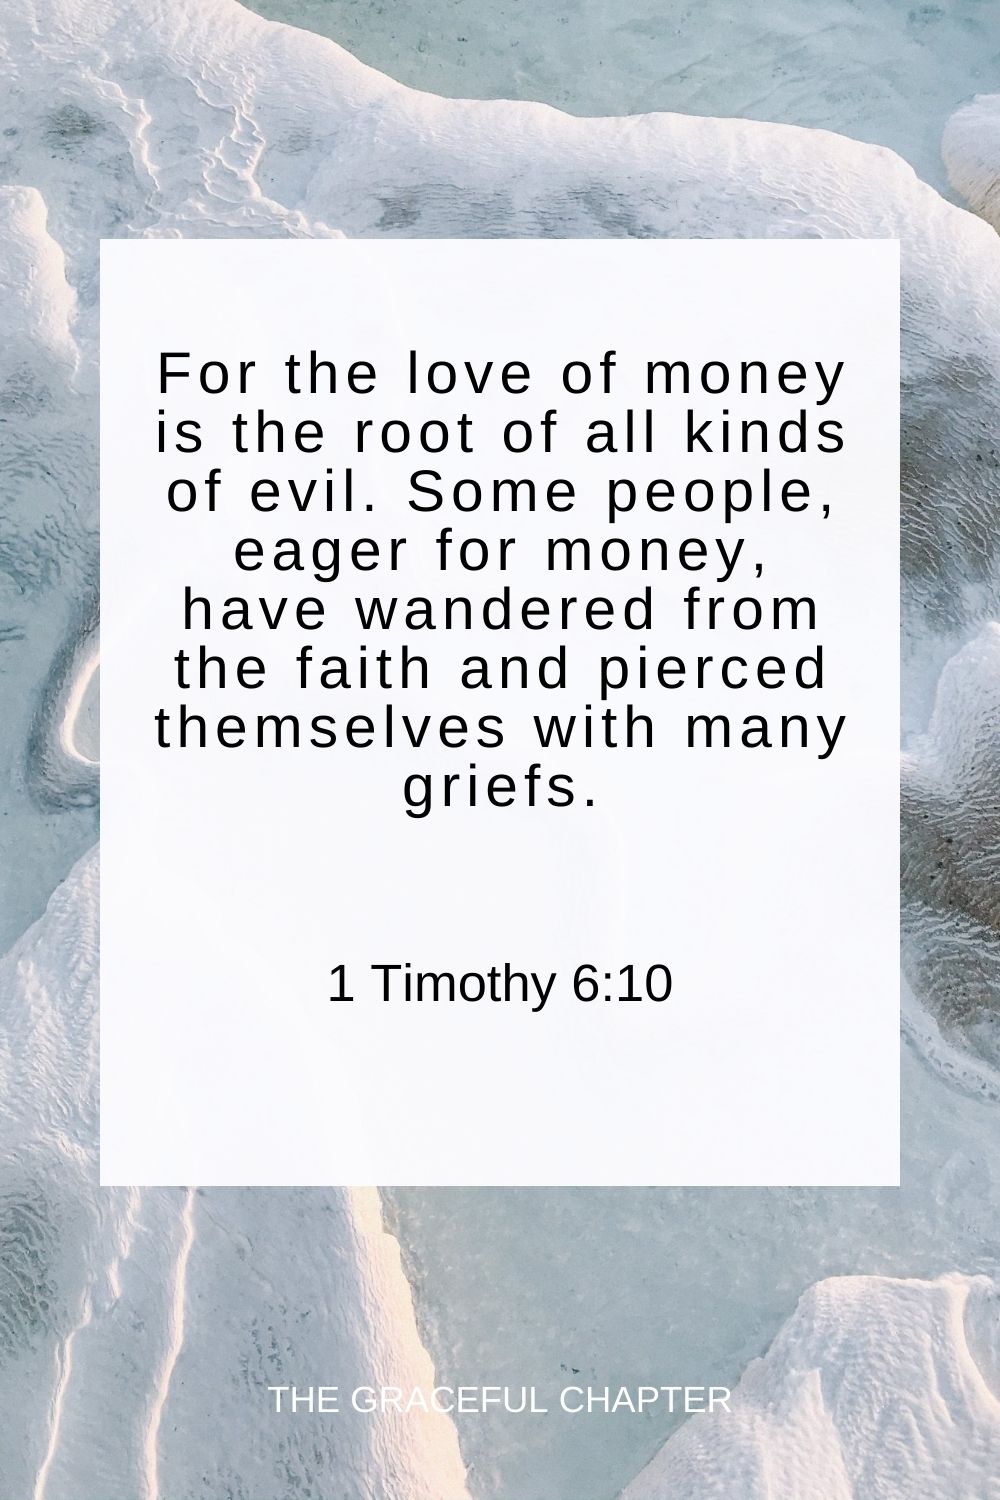 For the love of money is the root of all kinds of evil. Some people, eager for money, have wandered from the faith and pierced themselves with many griefs. 1 Timothy 6:10